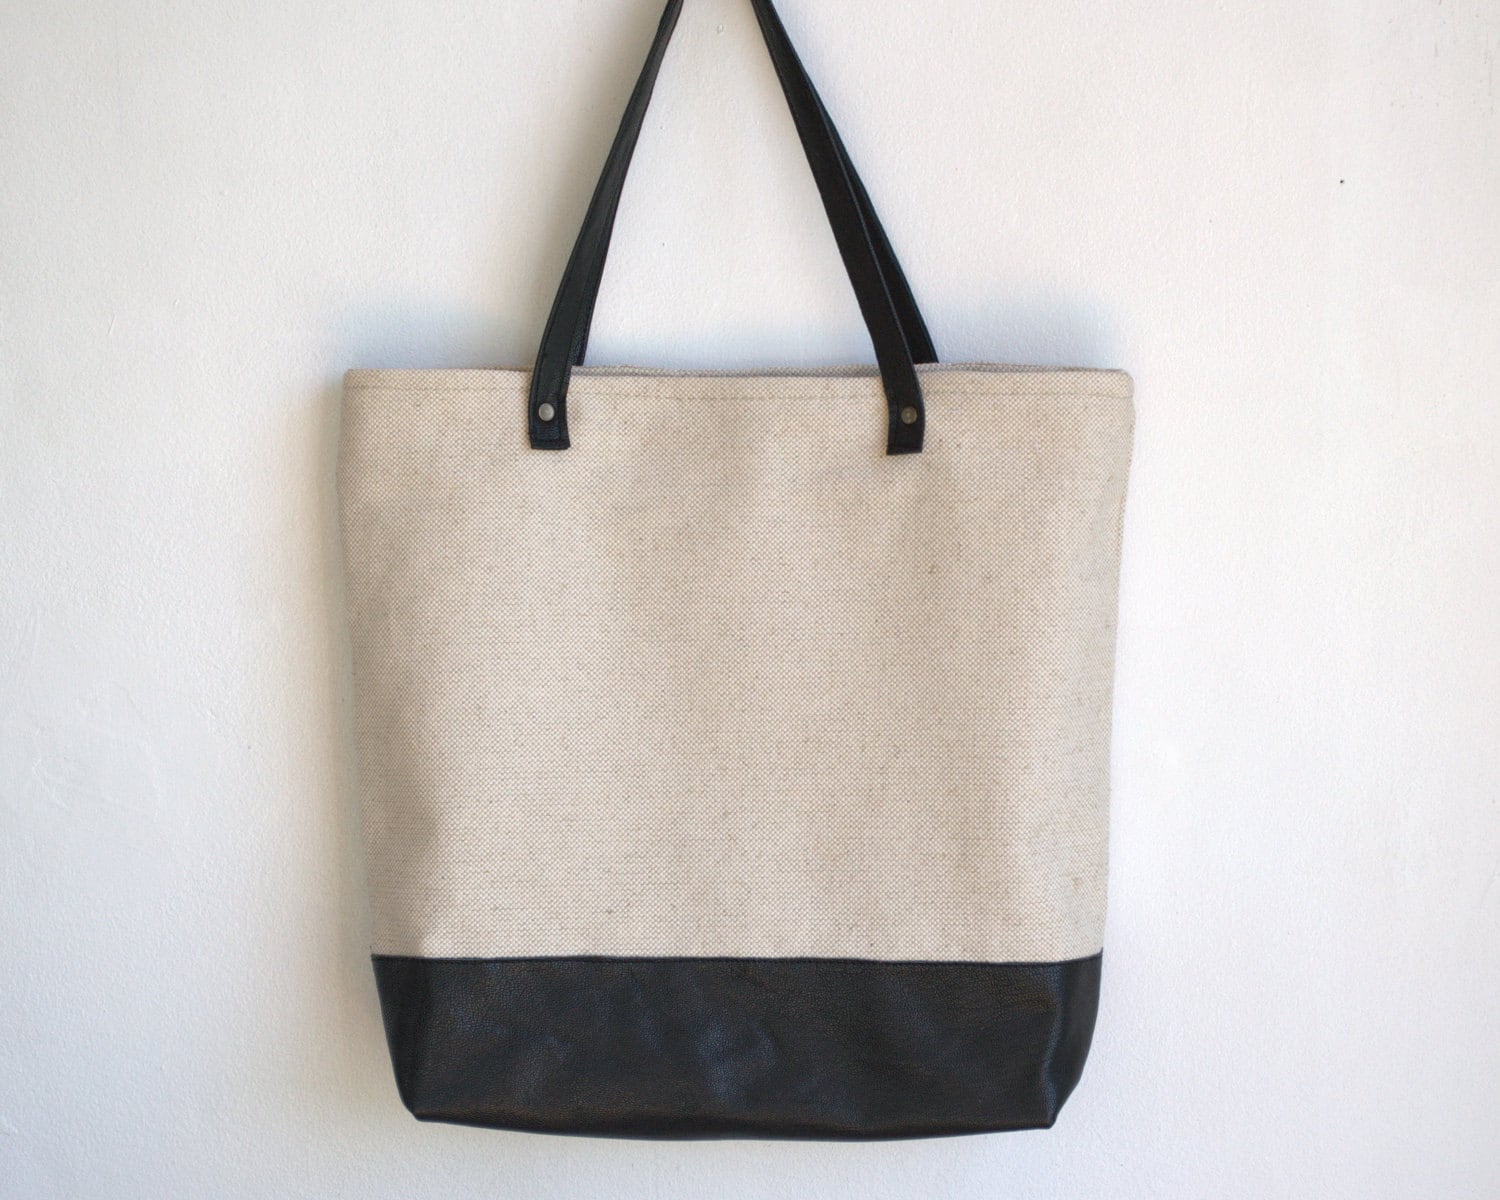 Tote bag canvas bag with leather handles 14x14